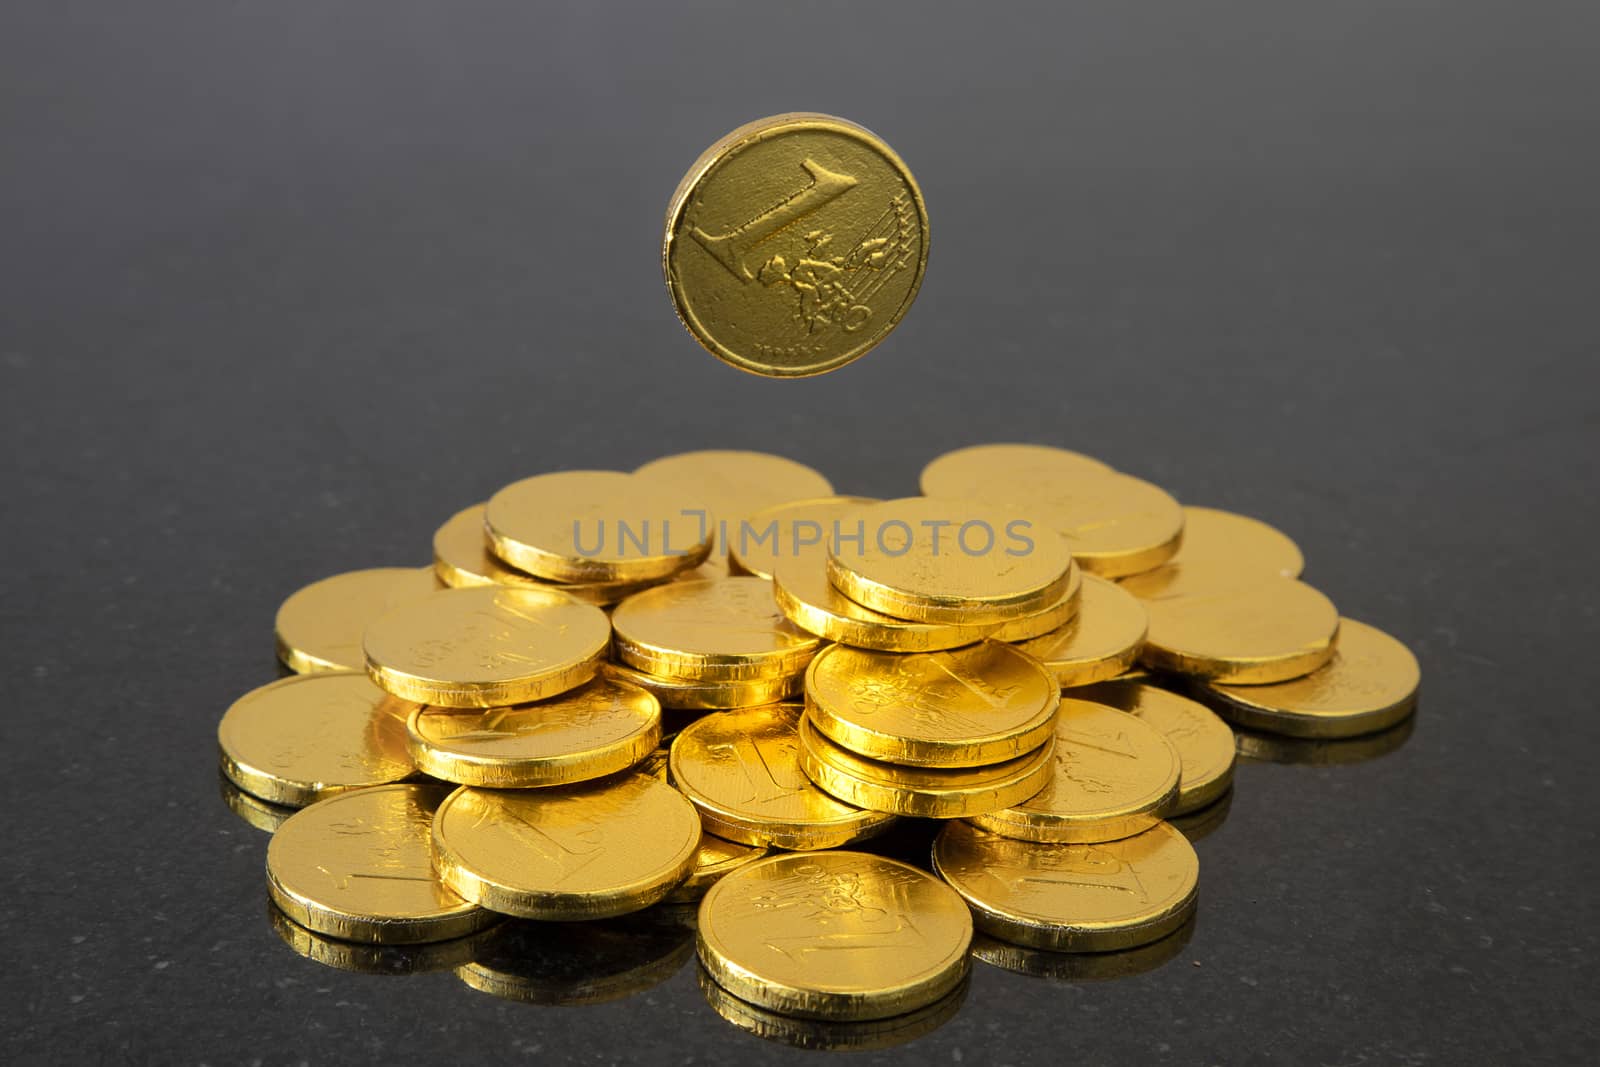 An image of a falling coin. Gold color, dark background.